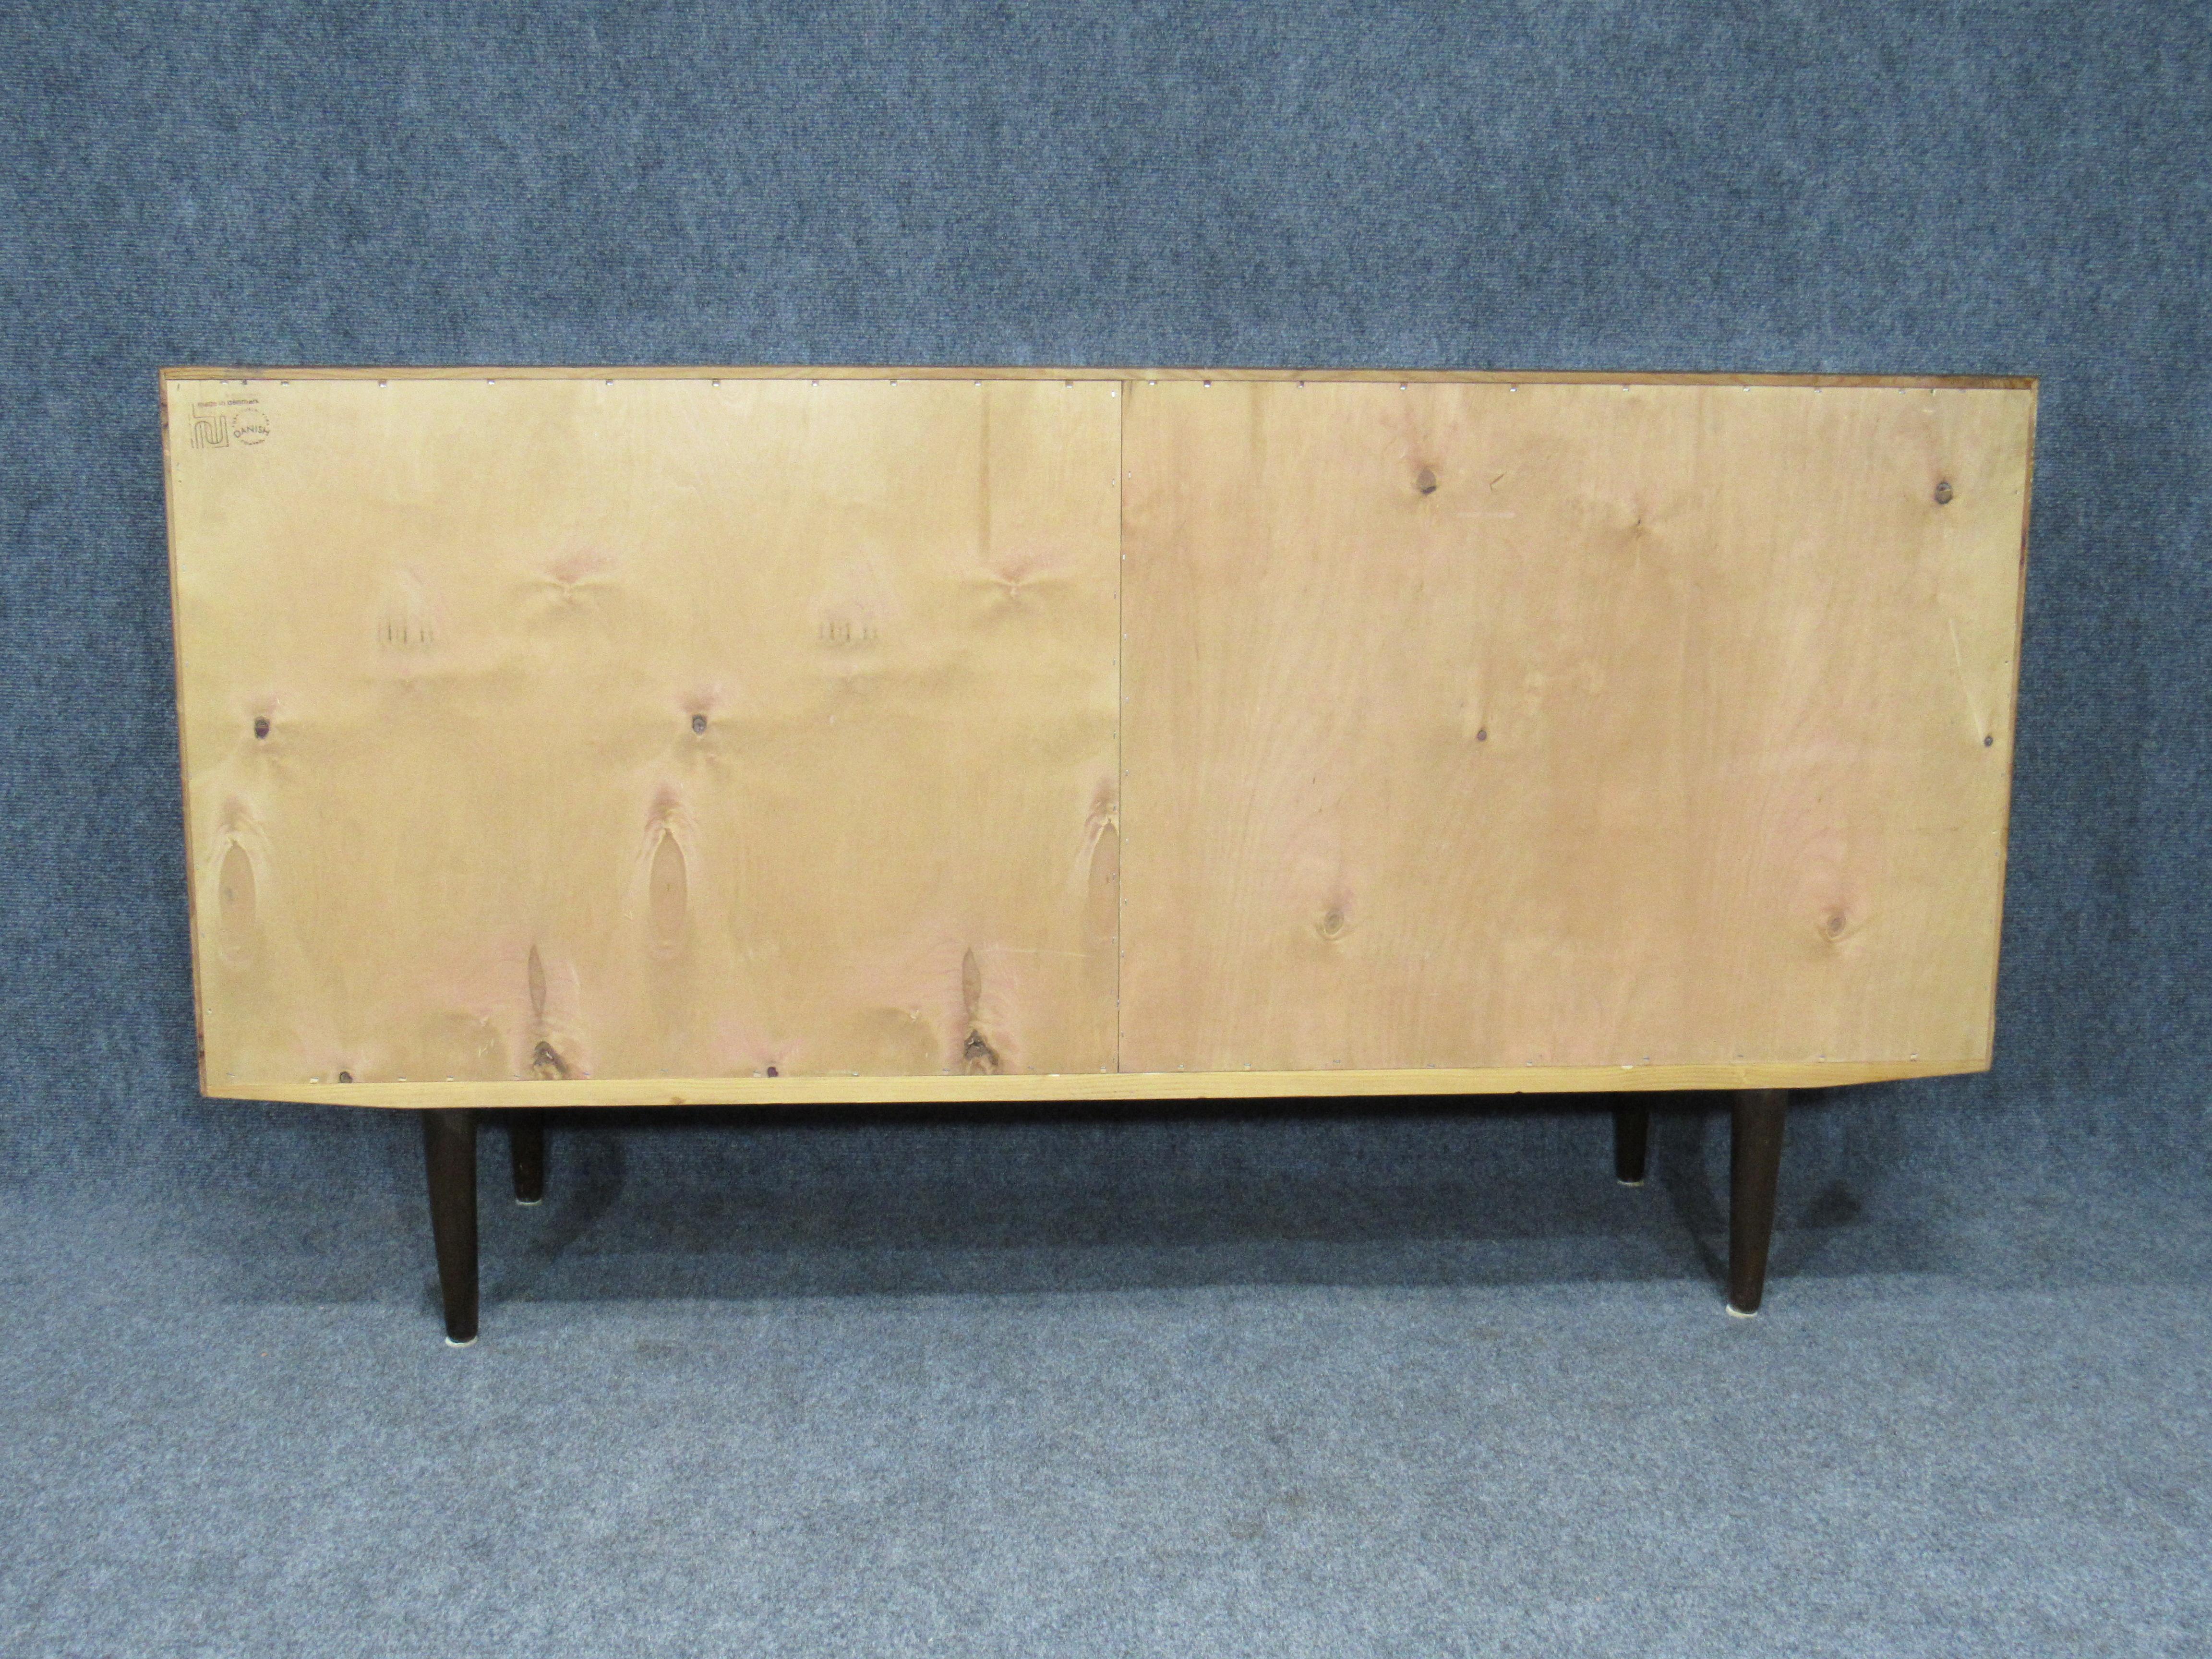 1960s Midcentury Danish Modern Rosewood Credenza Sideboard by Poul Hundevad 1